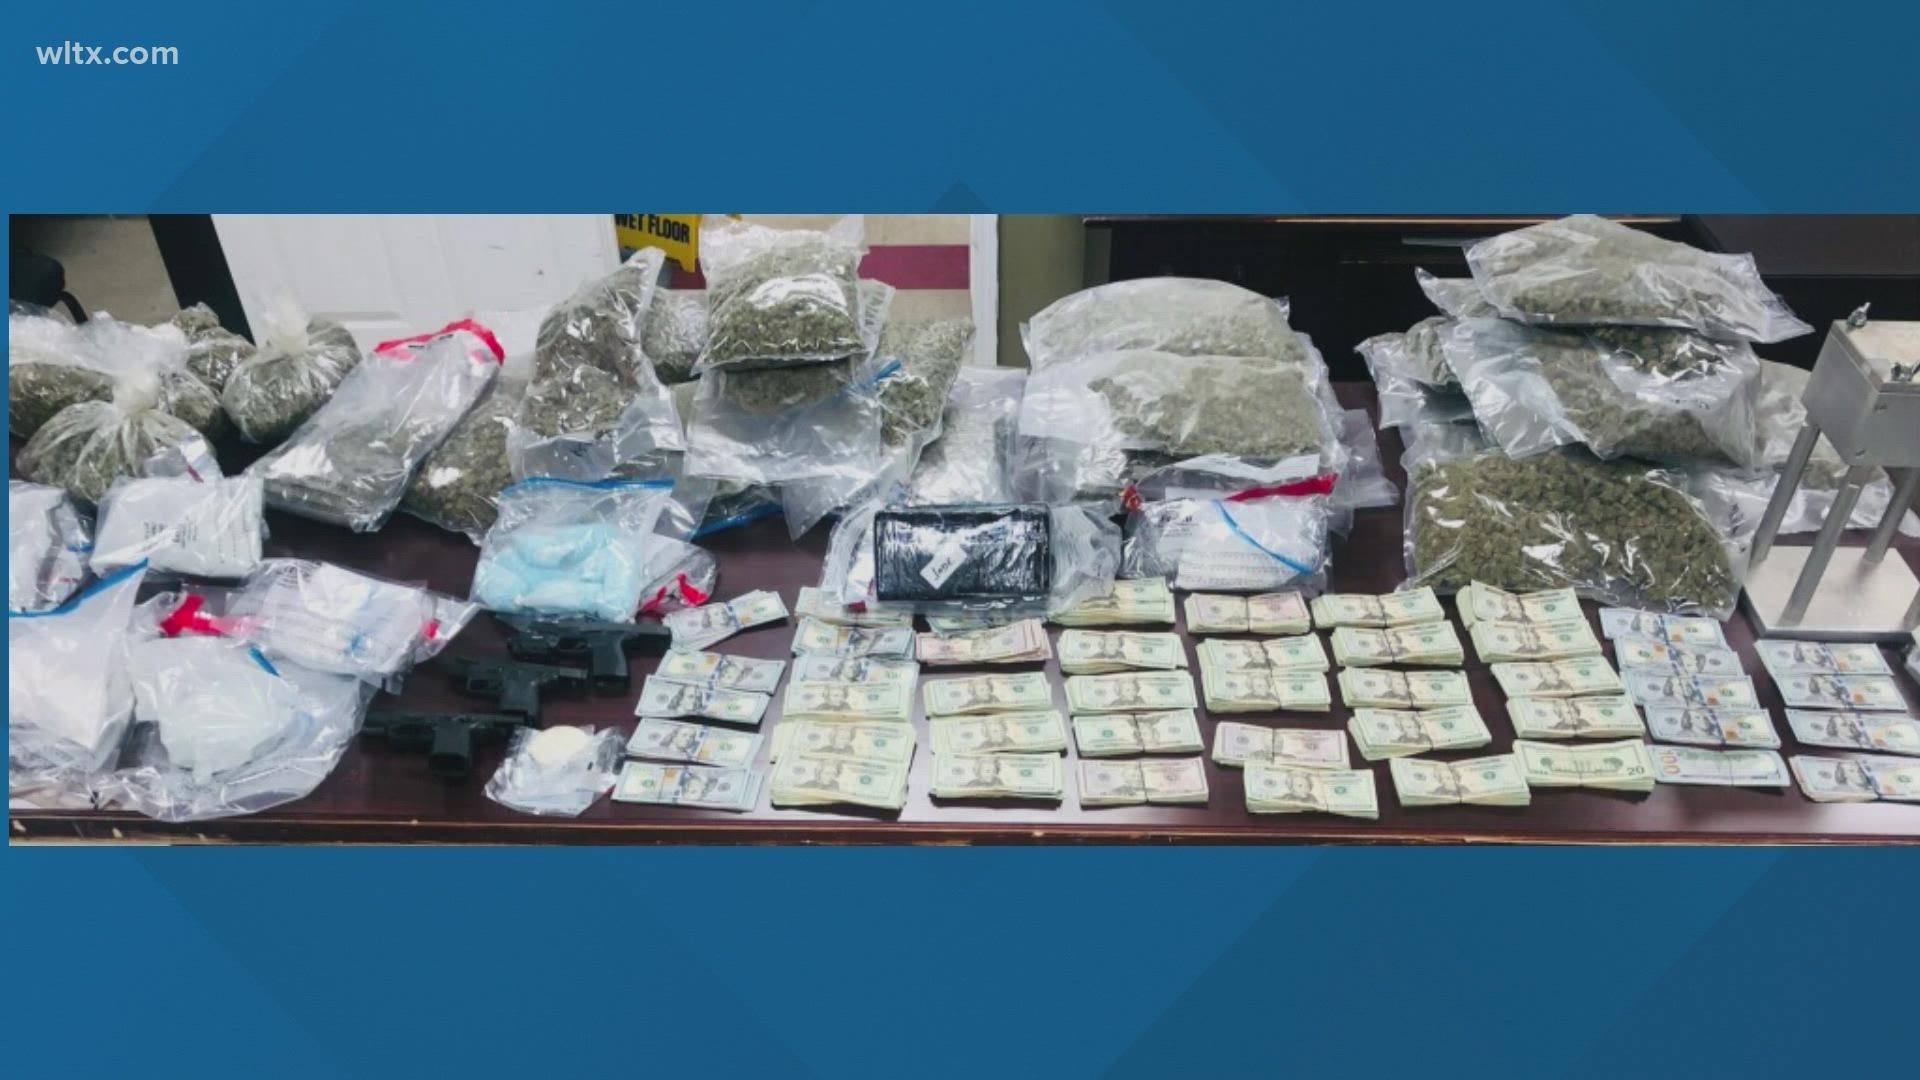 Deputies found a mix of marijuana, cocaine, meth and other drugs in a room at the America's Inn Motel.